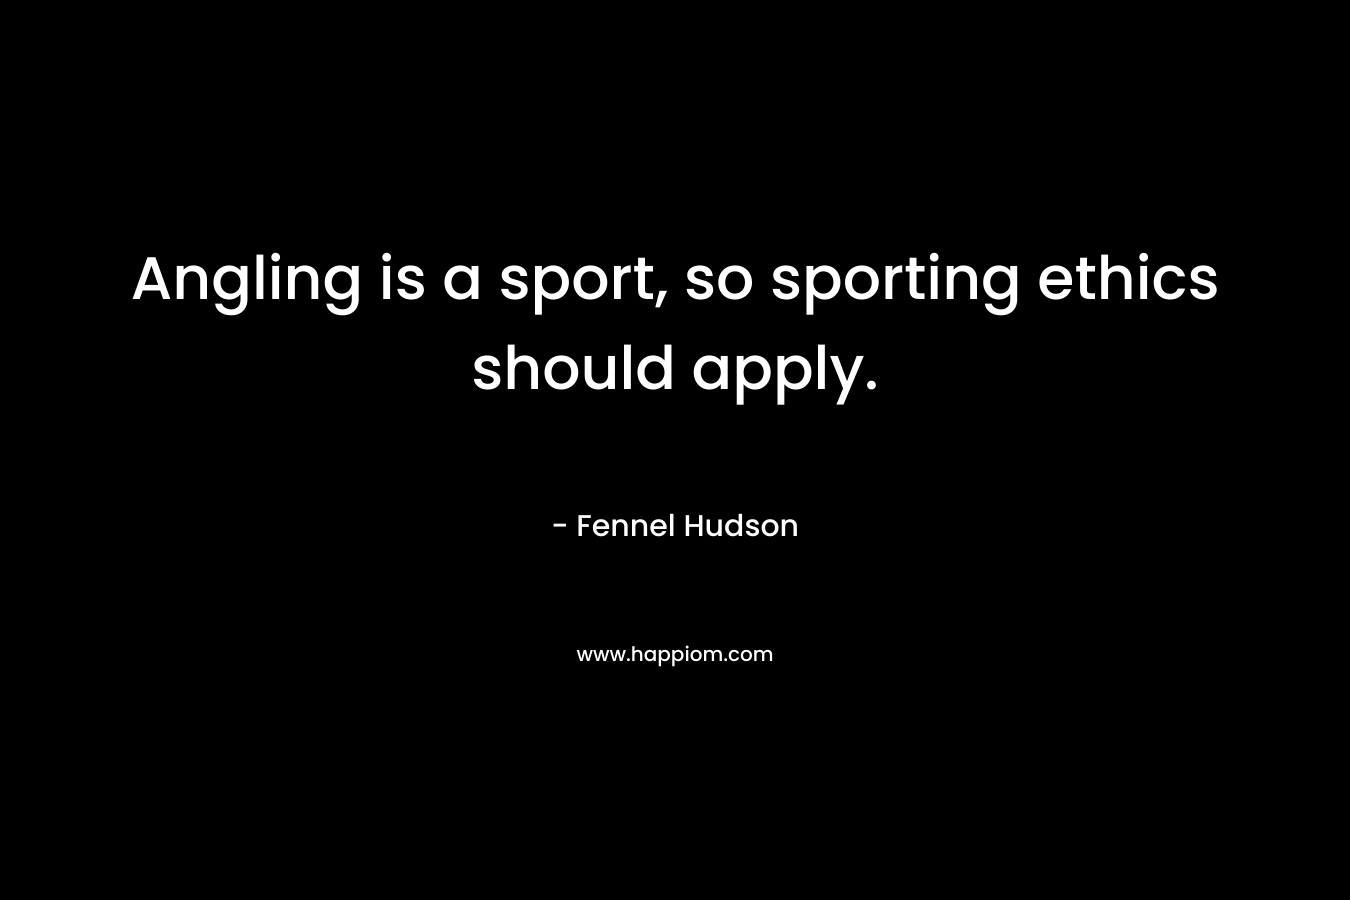 Angling is a sport, so sporting ethics should apply.